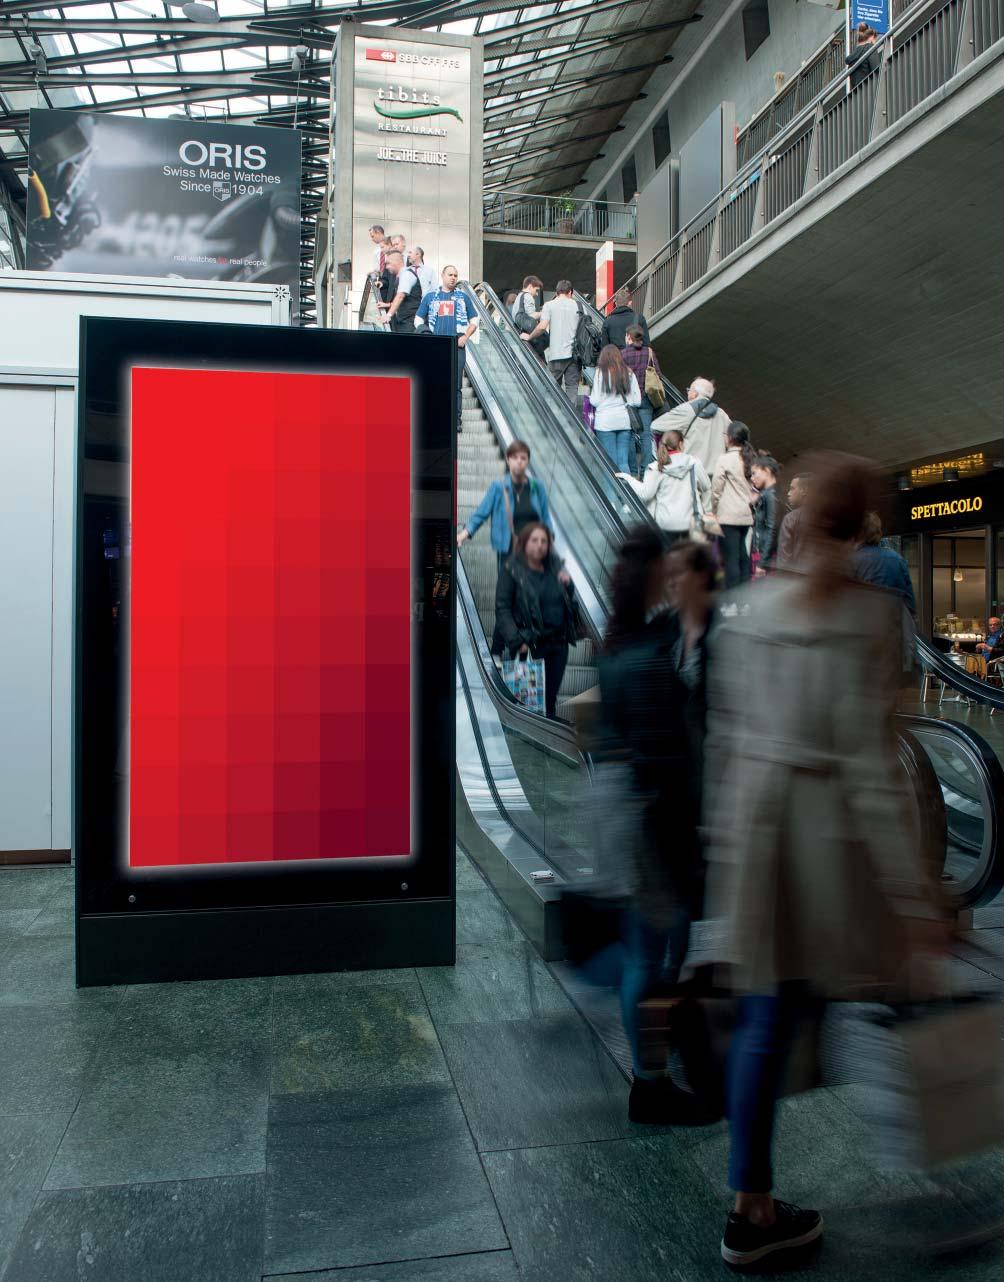 Digital Out of Home advertising in Switzerland